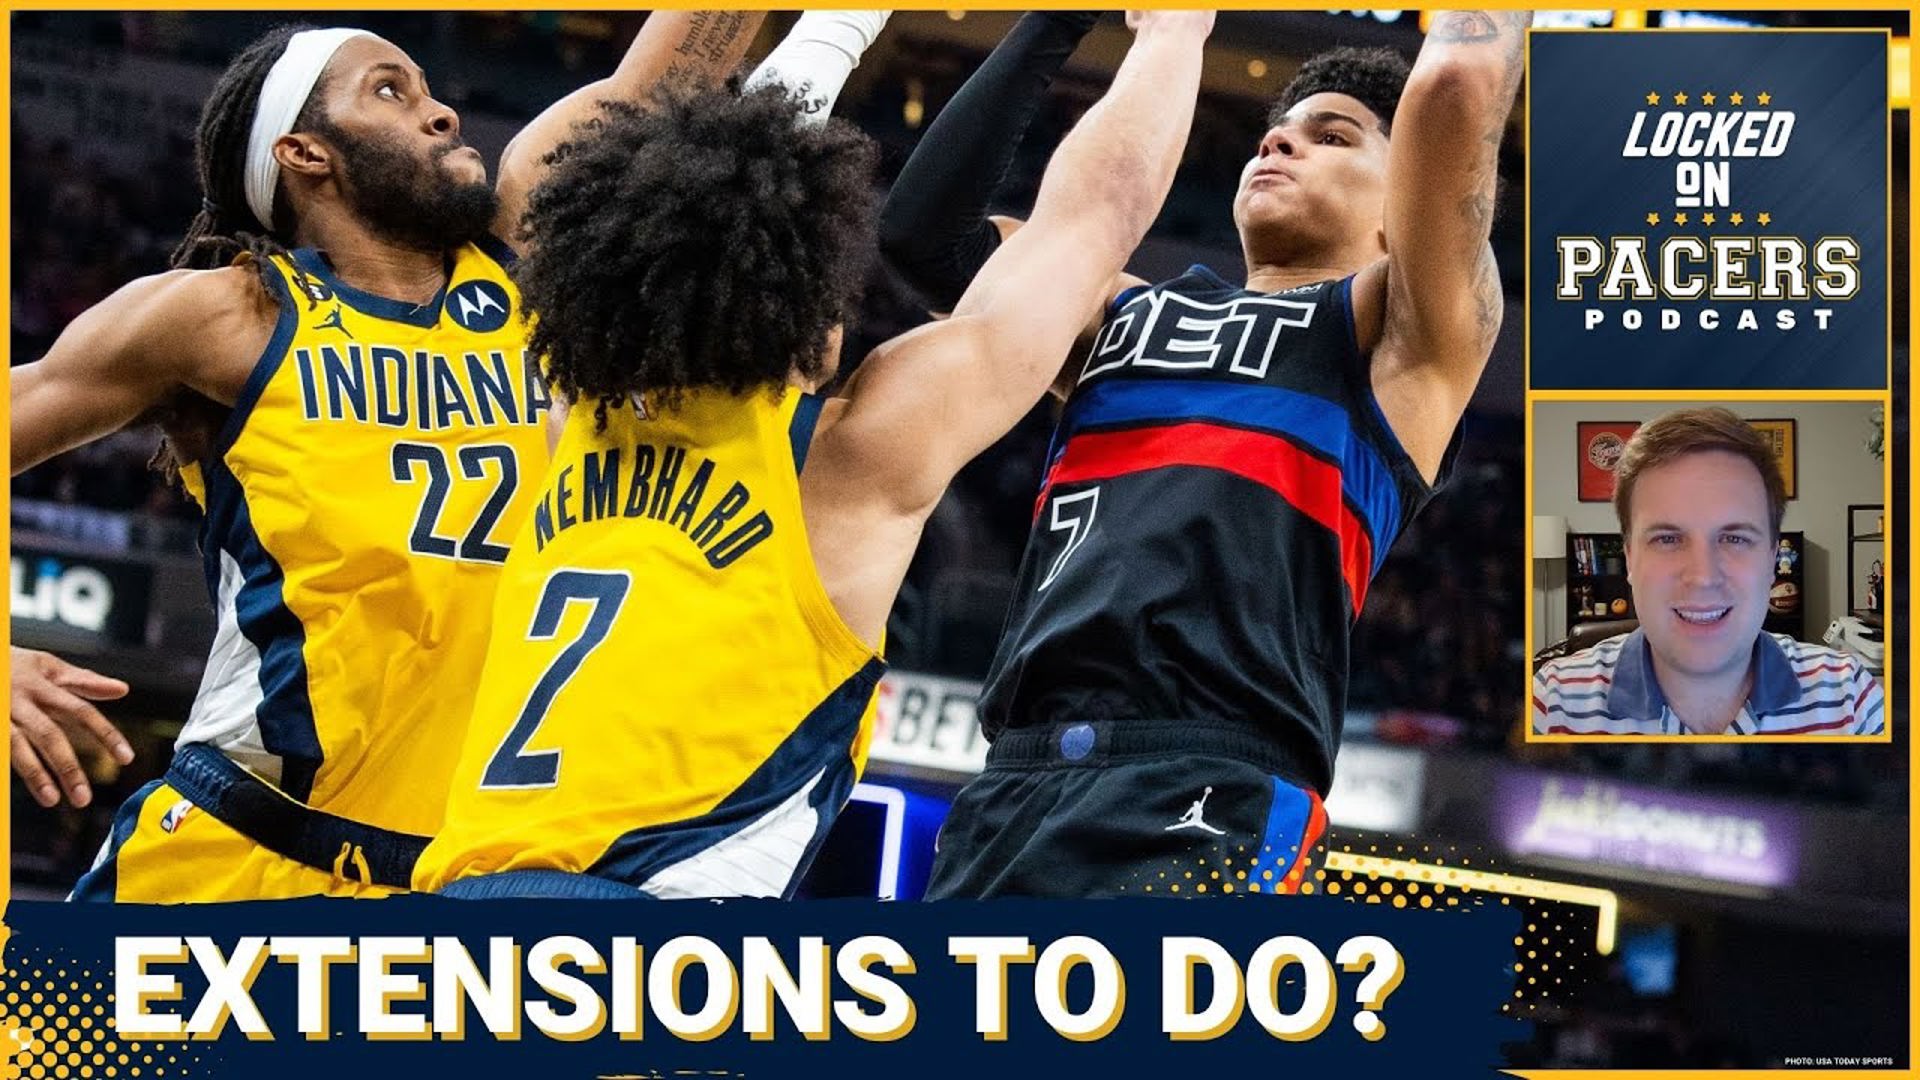 Who should the Indiana Pacers give contract extensions to this year? Andrew Nembhard? TJ McConnell?